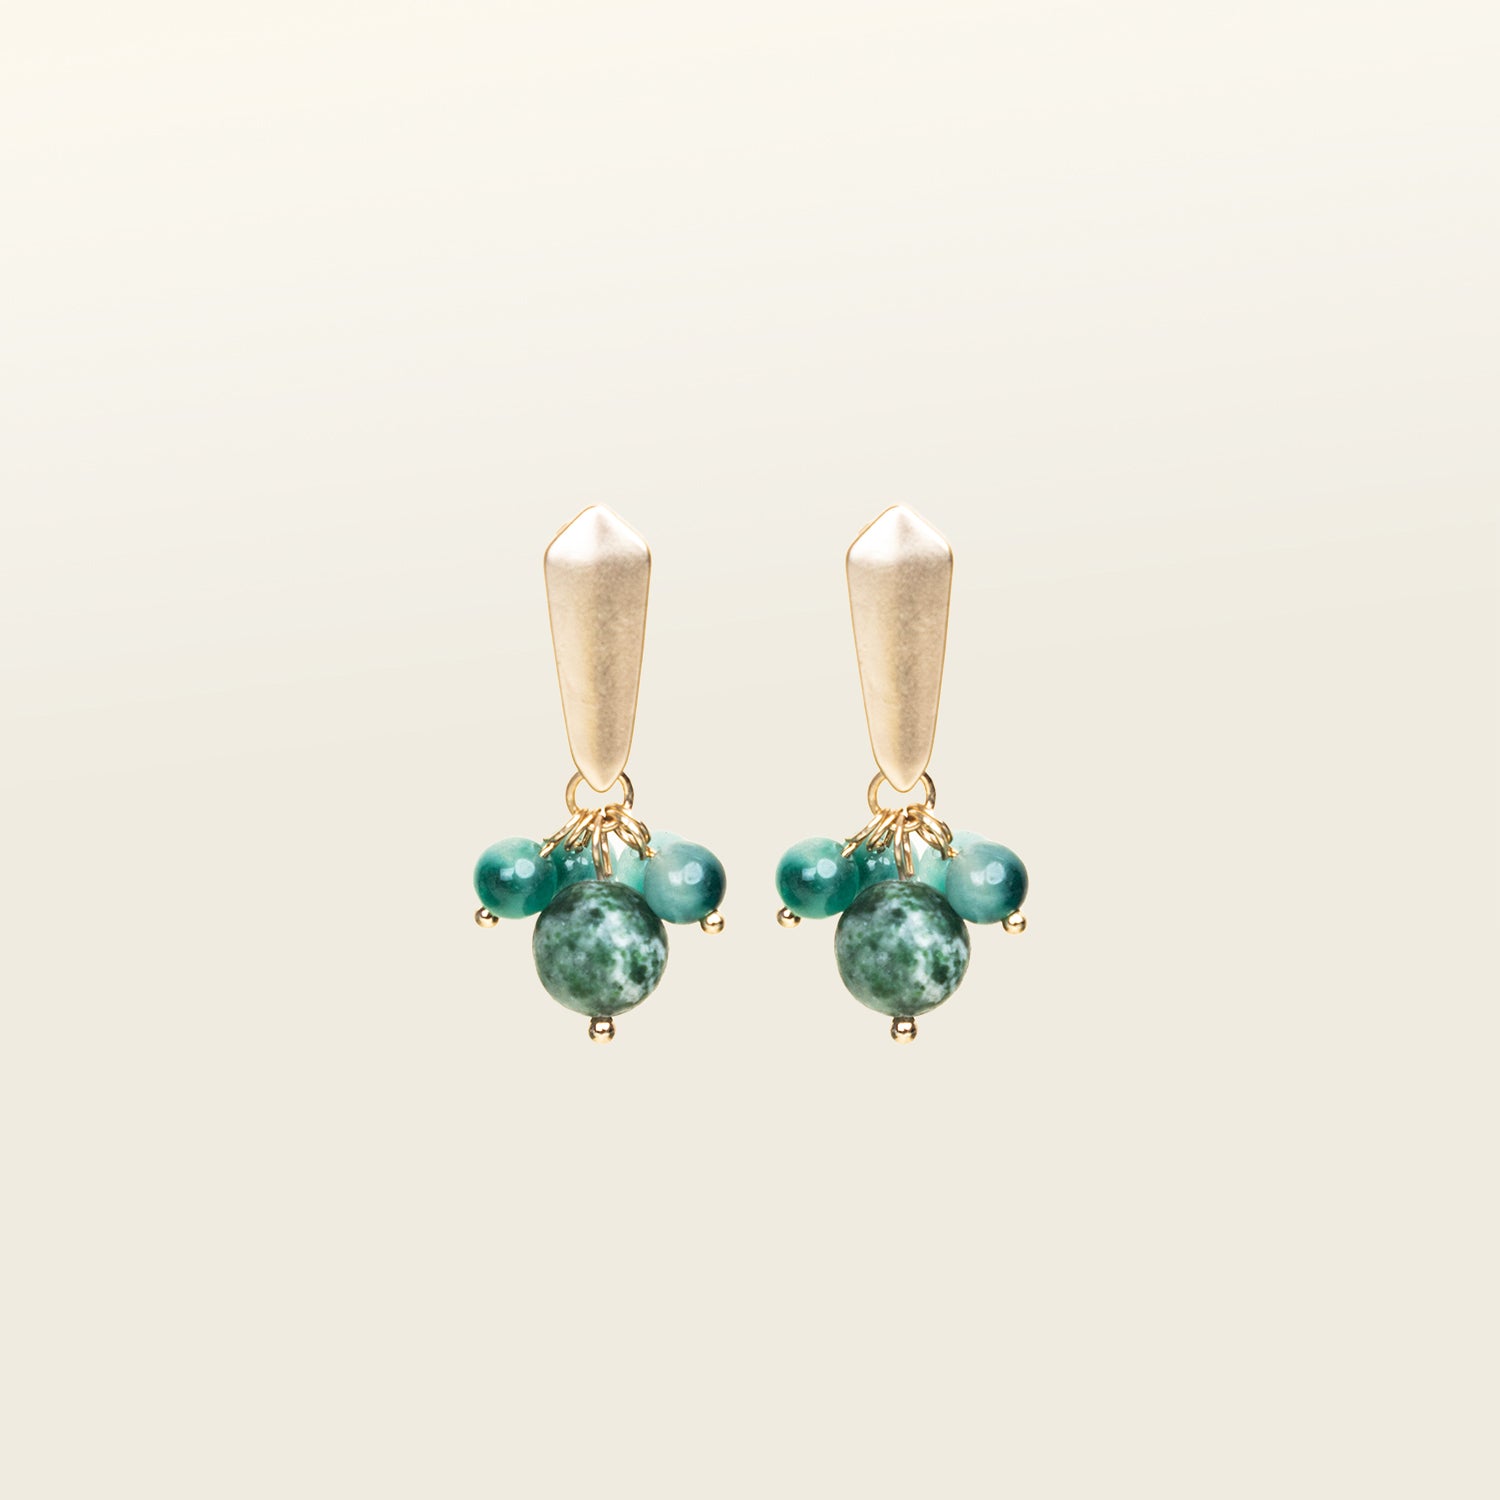 Trendy clip-on pearl earrings in a beautiful green hue. Ideal for all ear types, these earrings offer a comfortable wear duration of 8-12 hours. Agate and glass bead embellishments add a touch of glamour.